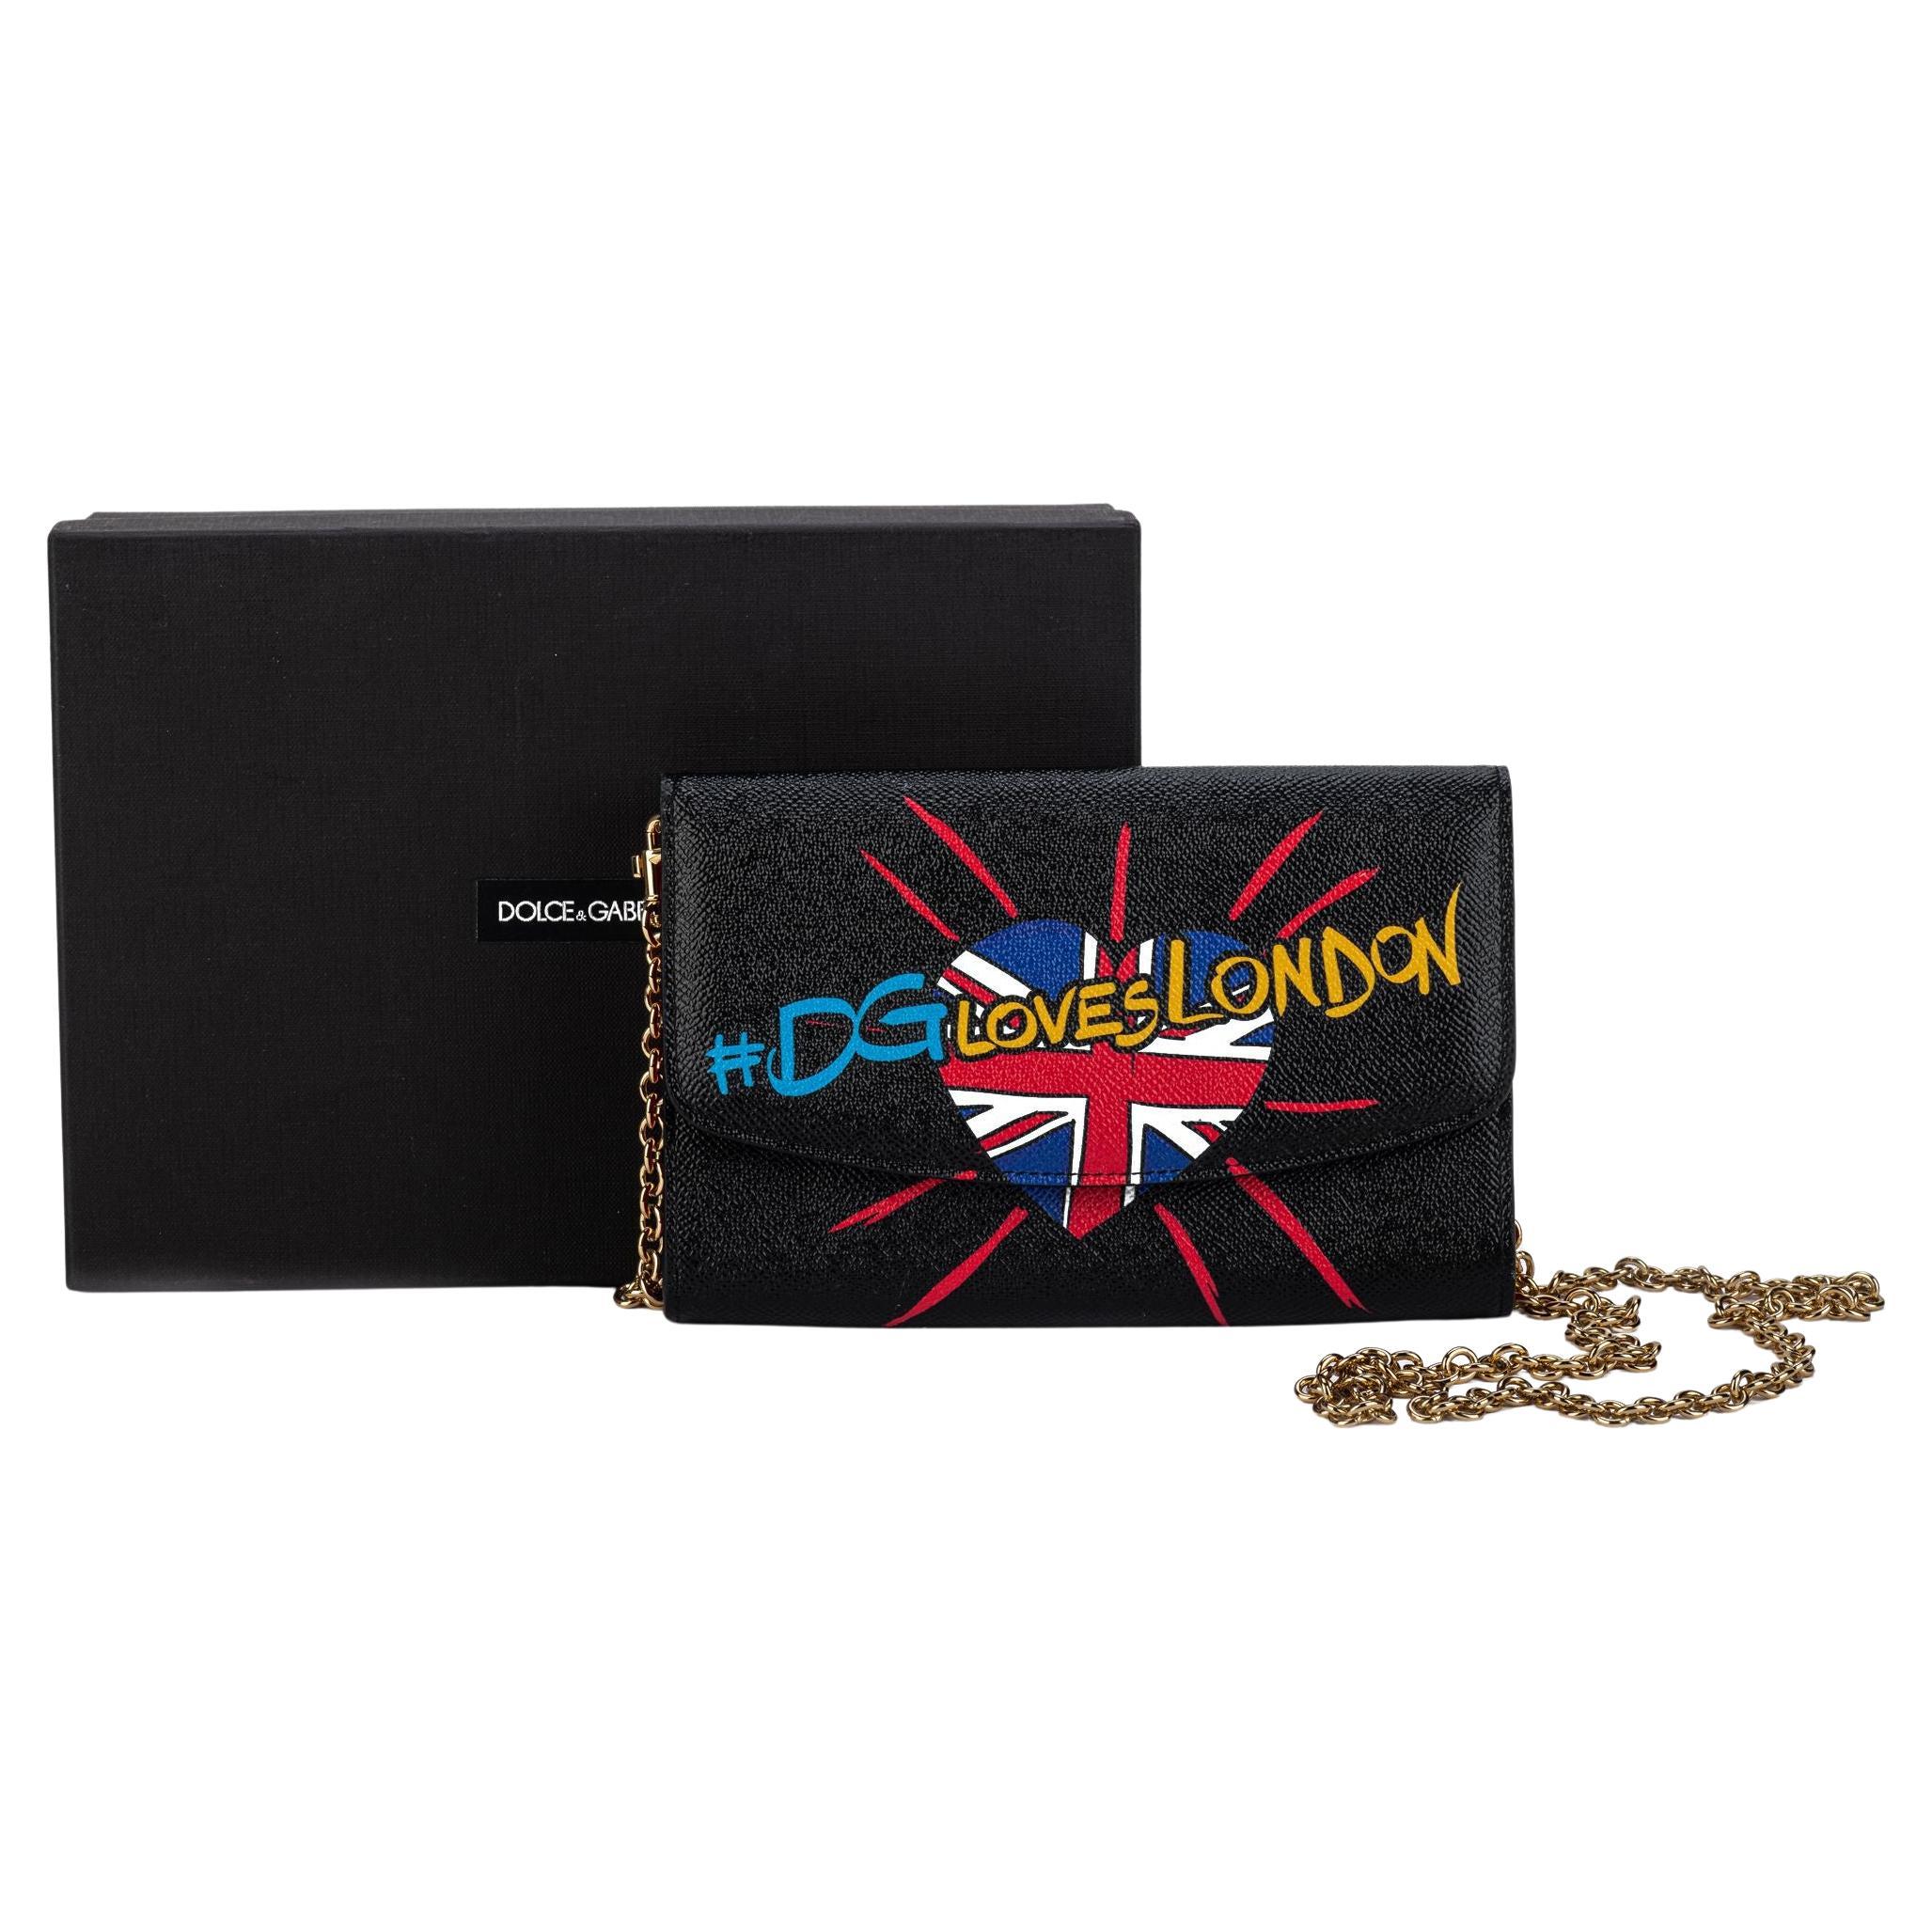 Dolce & Gabbana London Wallet On A Chain For Sale